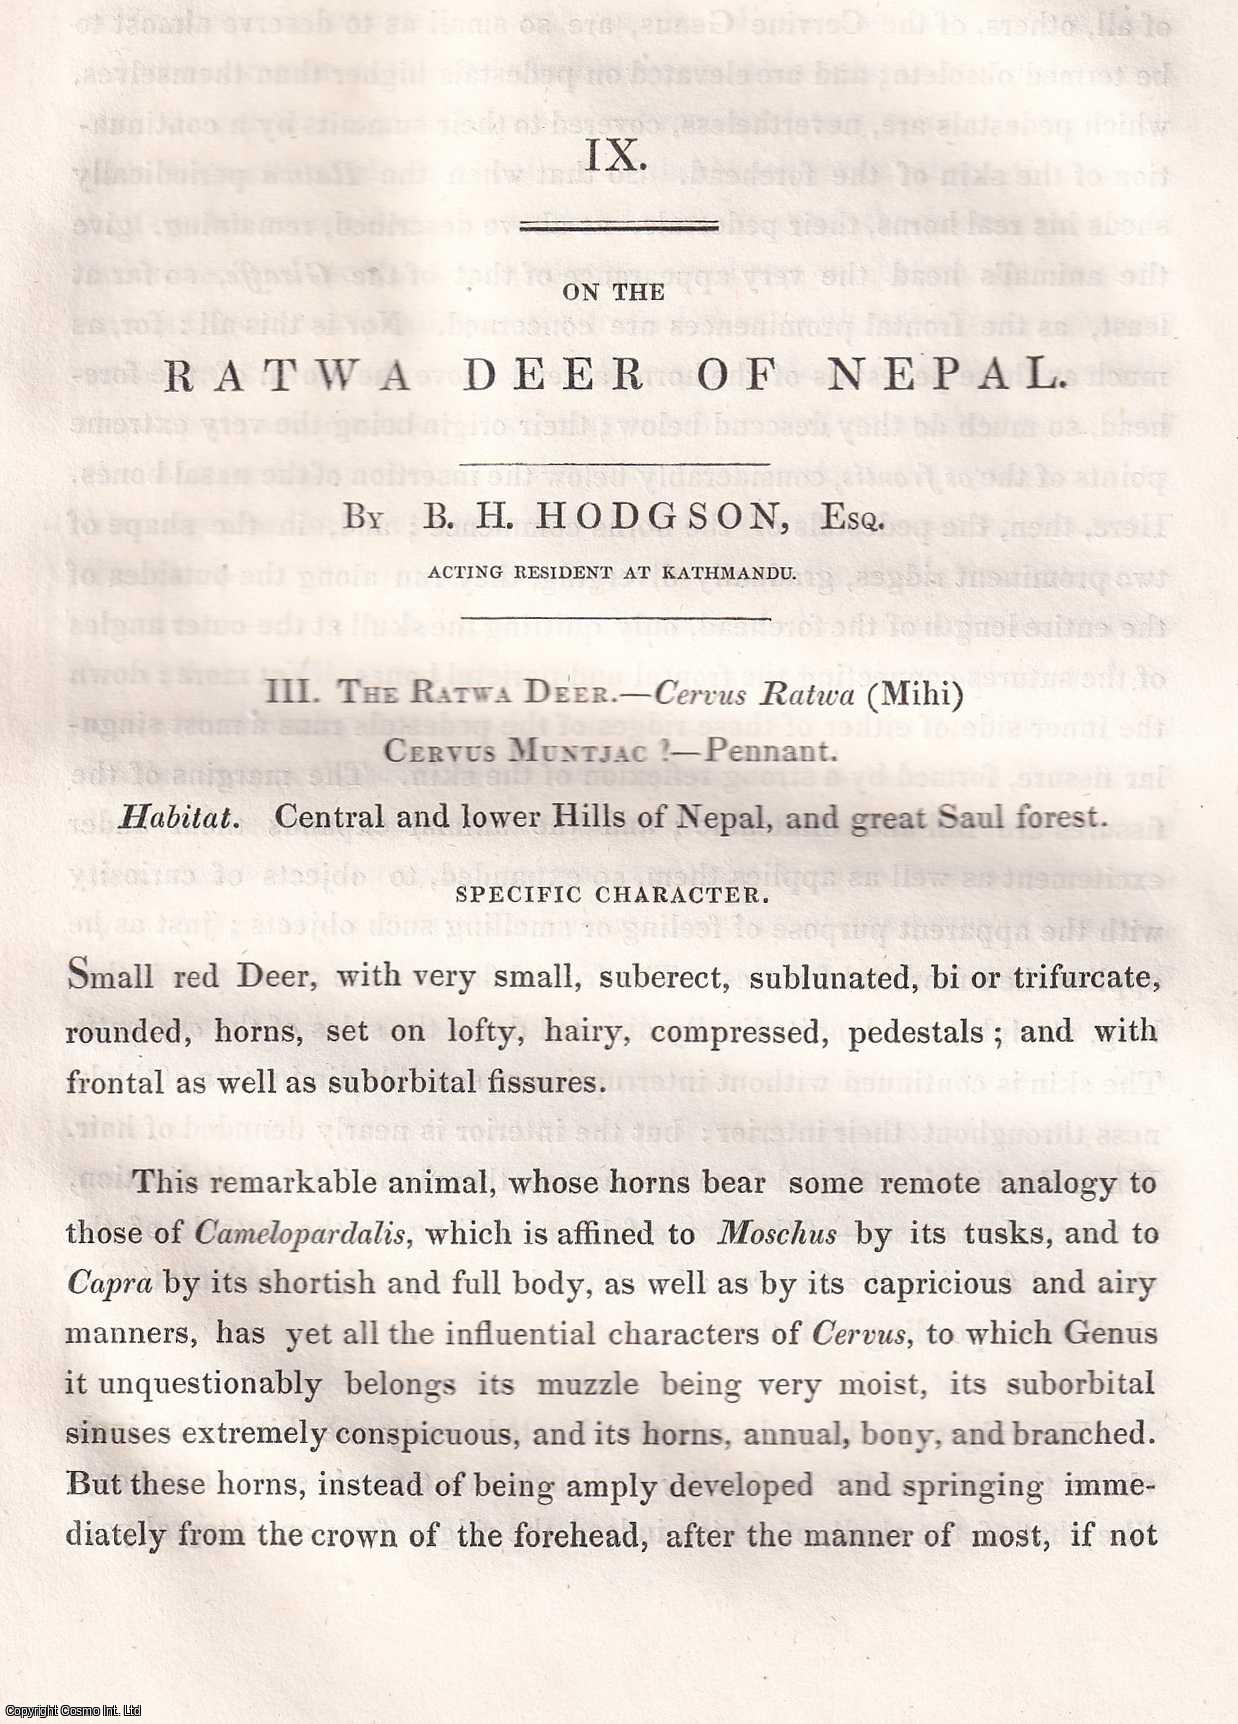 B.H. Hodgson, Acting Resident at Kathmandu - On the Ratwa Deer of Nepal. An original article extracted from Asiatic Researches; or Transactions of the Society Instituted in Bengal, 1833. [Afterwards known as The Asiatic Society of Bengal].